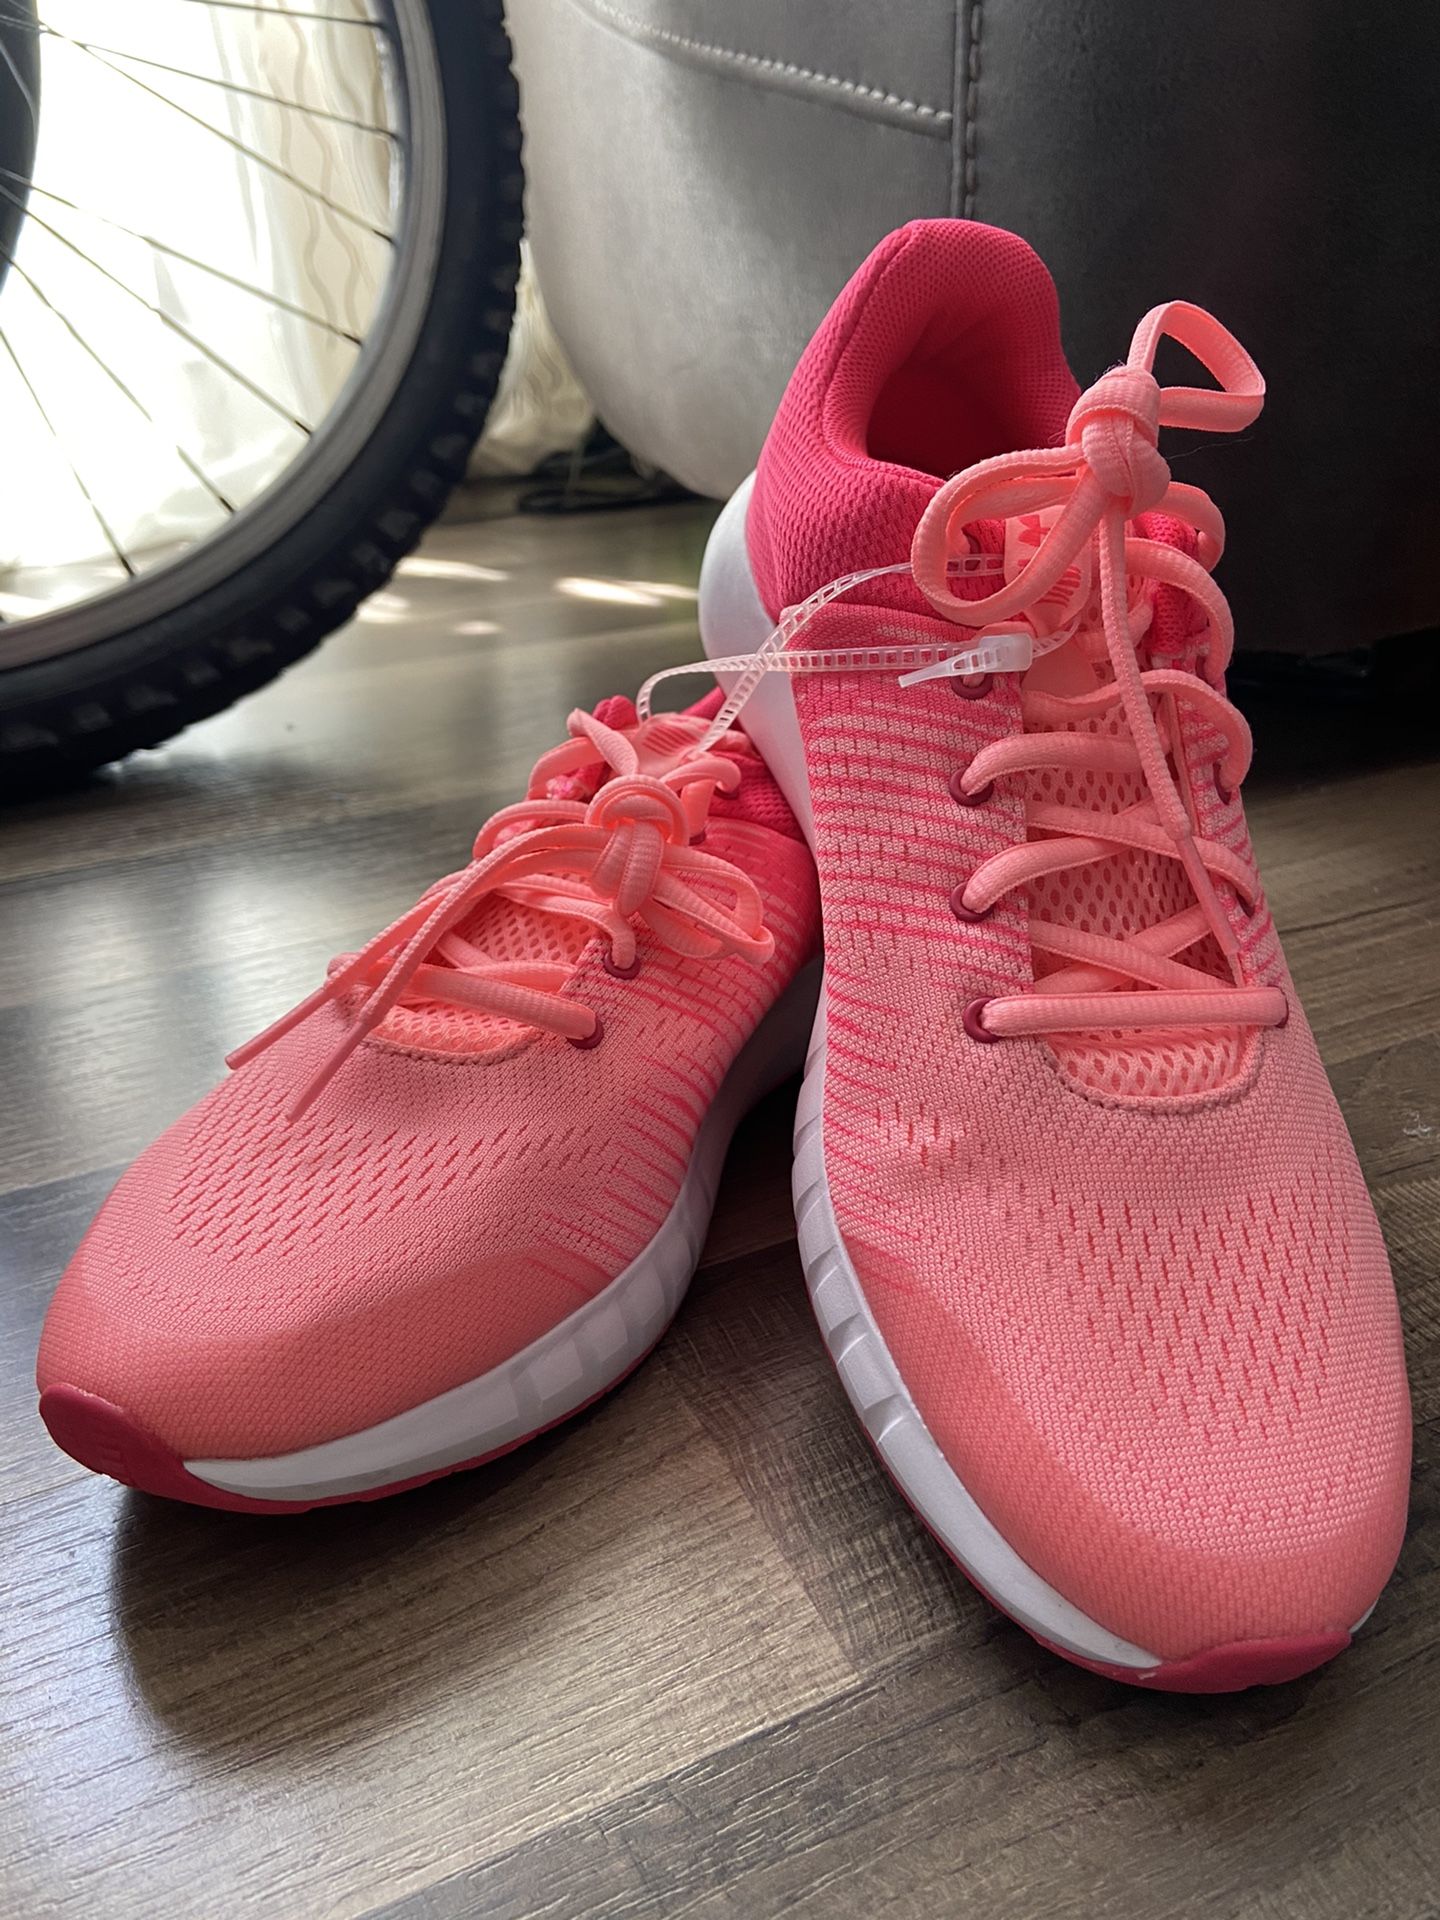 UNDER ARMOUR Salmon Pink Running Shoes - BRAND NEW Women’s 7